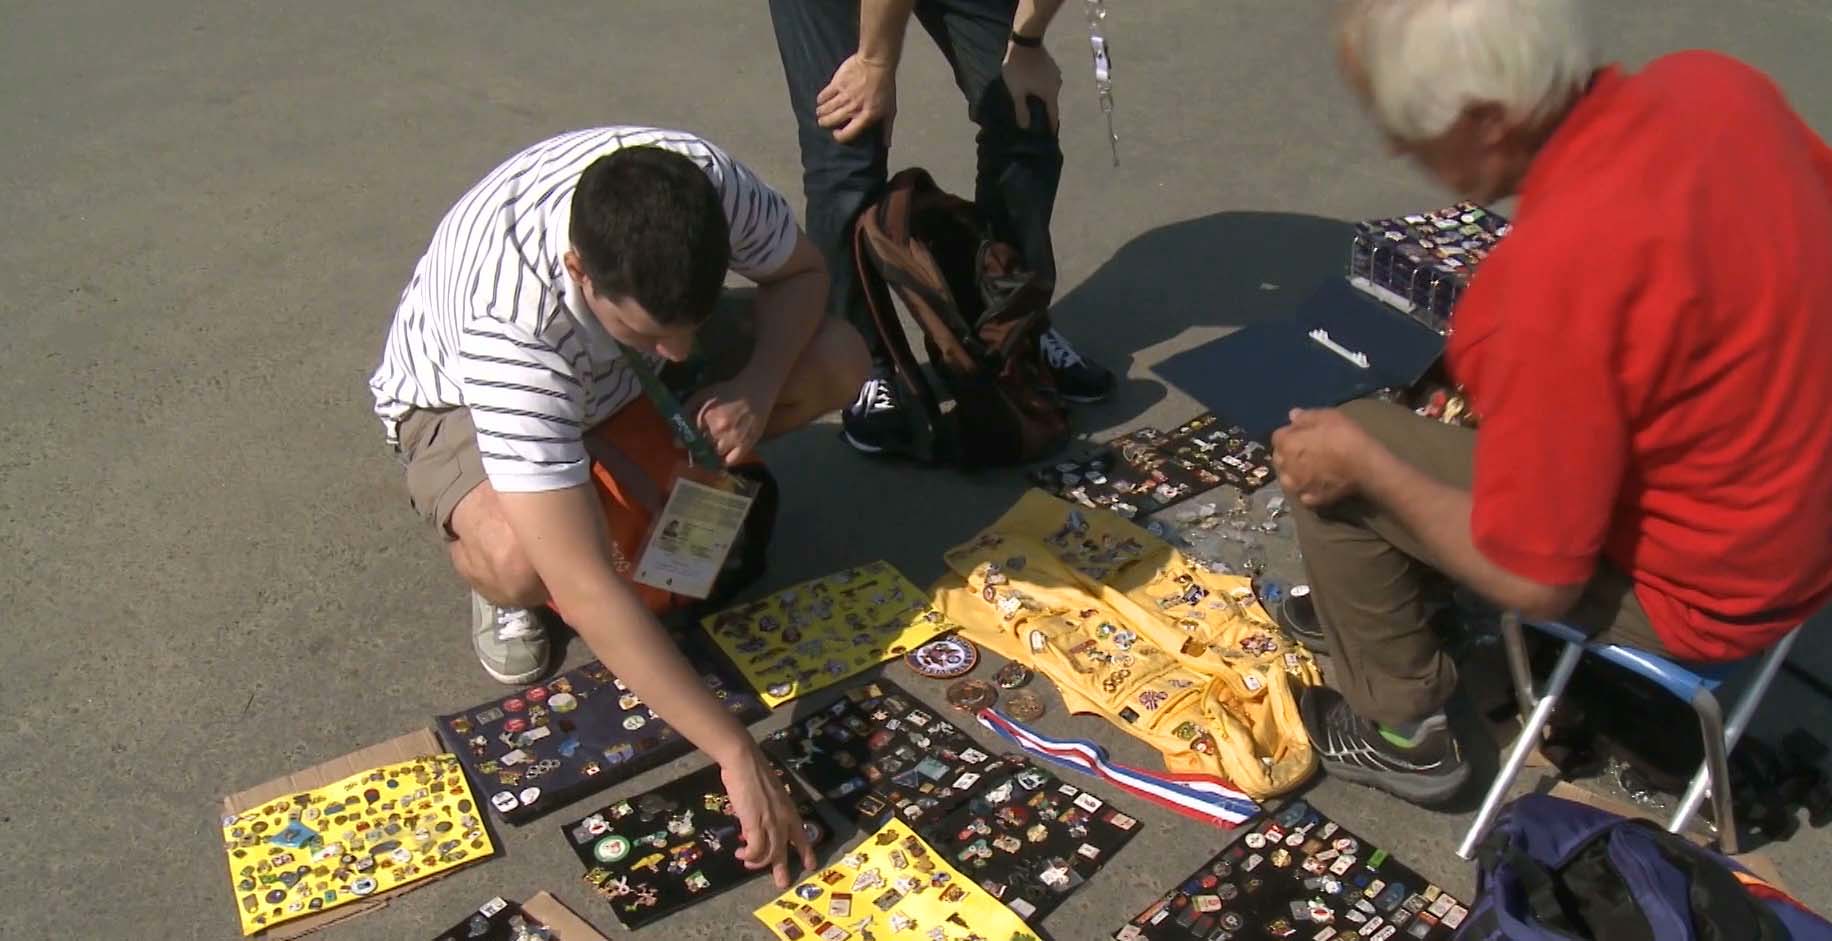 Pinheads at the Olympic Winter Games: Pin Trading is Huge